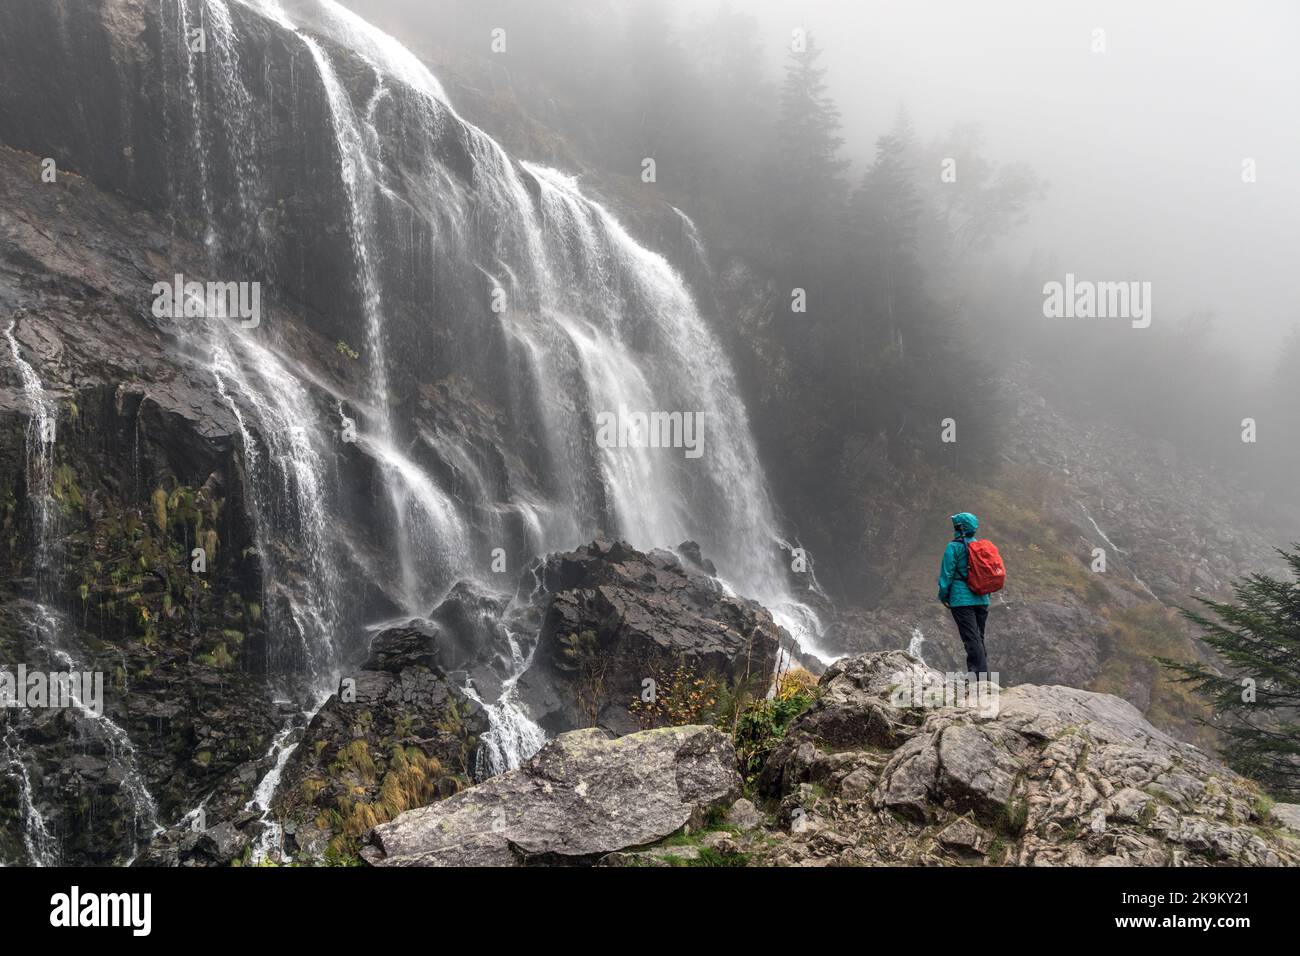 Walker Enjoying a Spectacular view of the Cascade d’Ars in the Rain, Aulus les Bains, Ariege, Pyrenees, France, EU Stock Photo